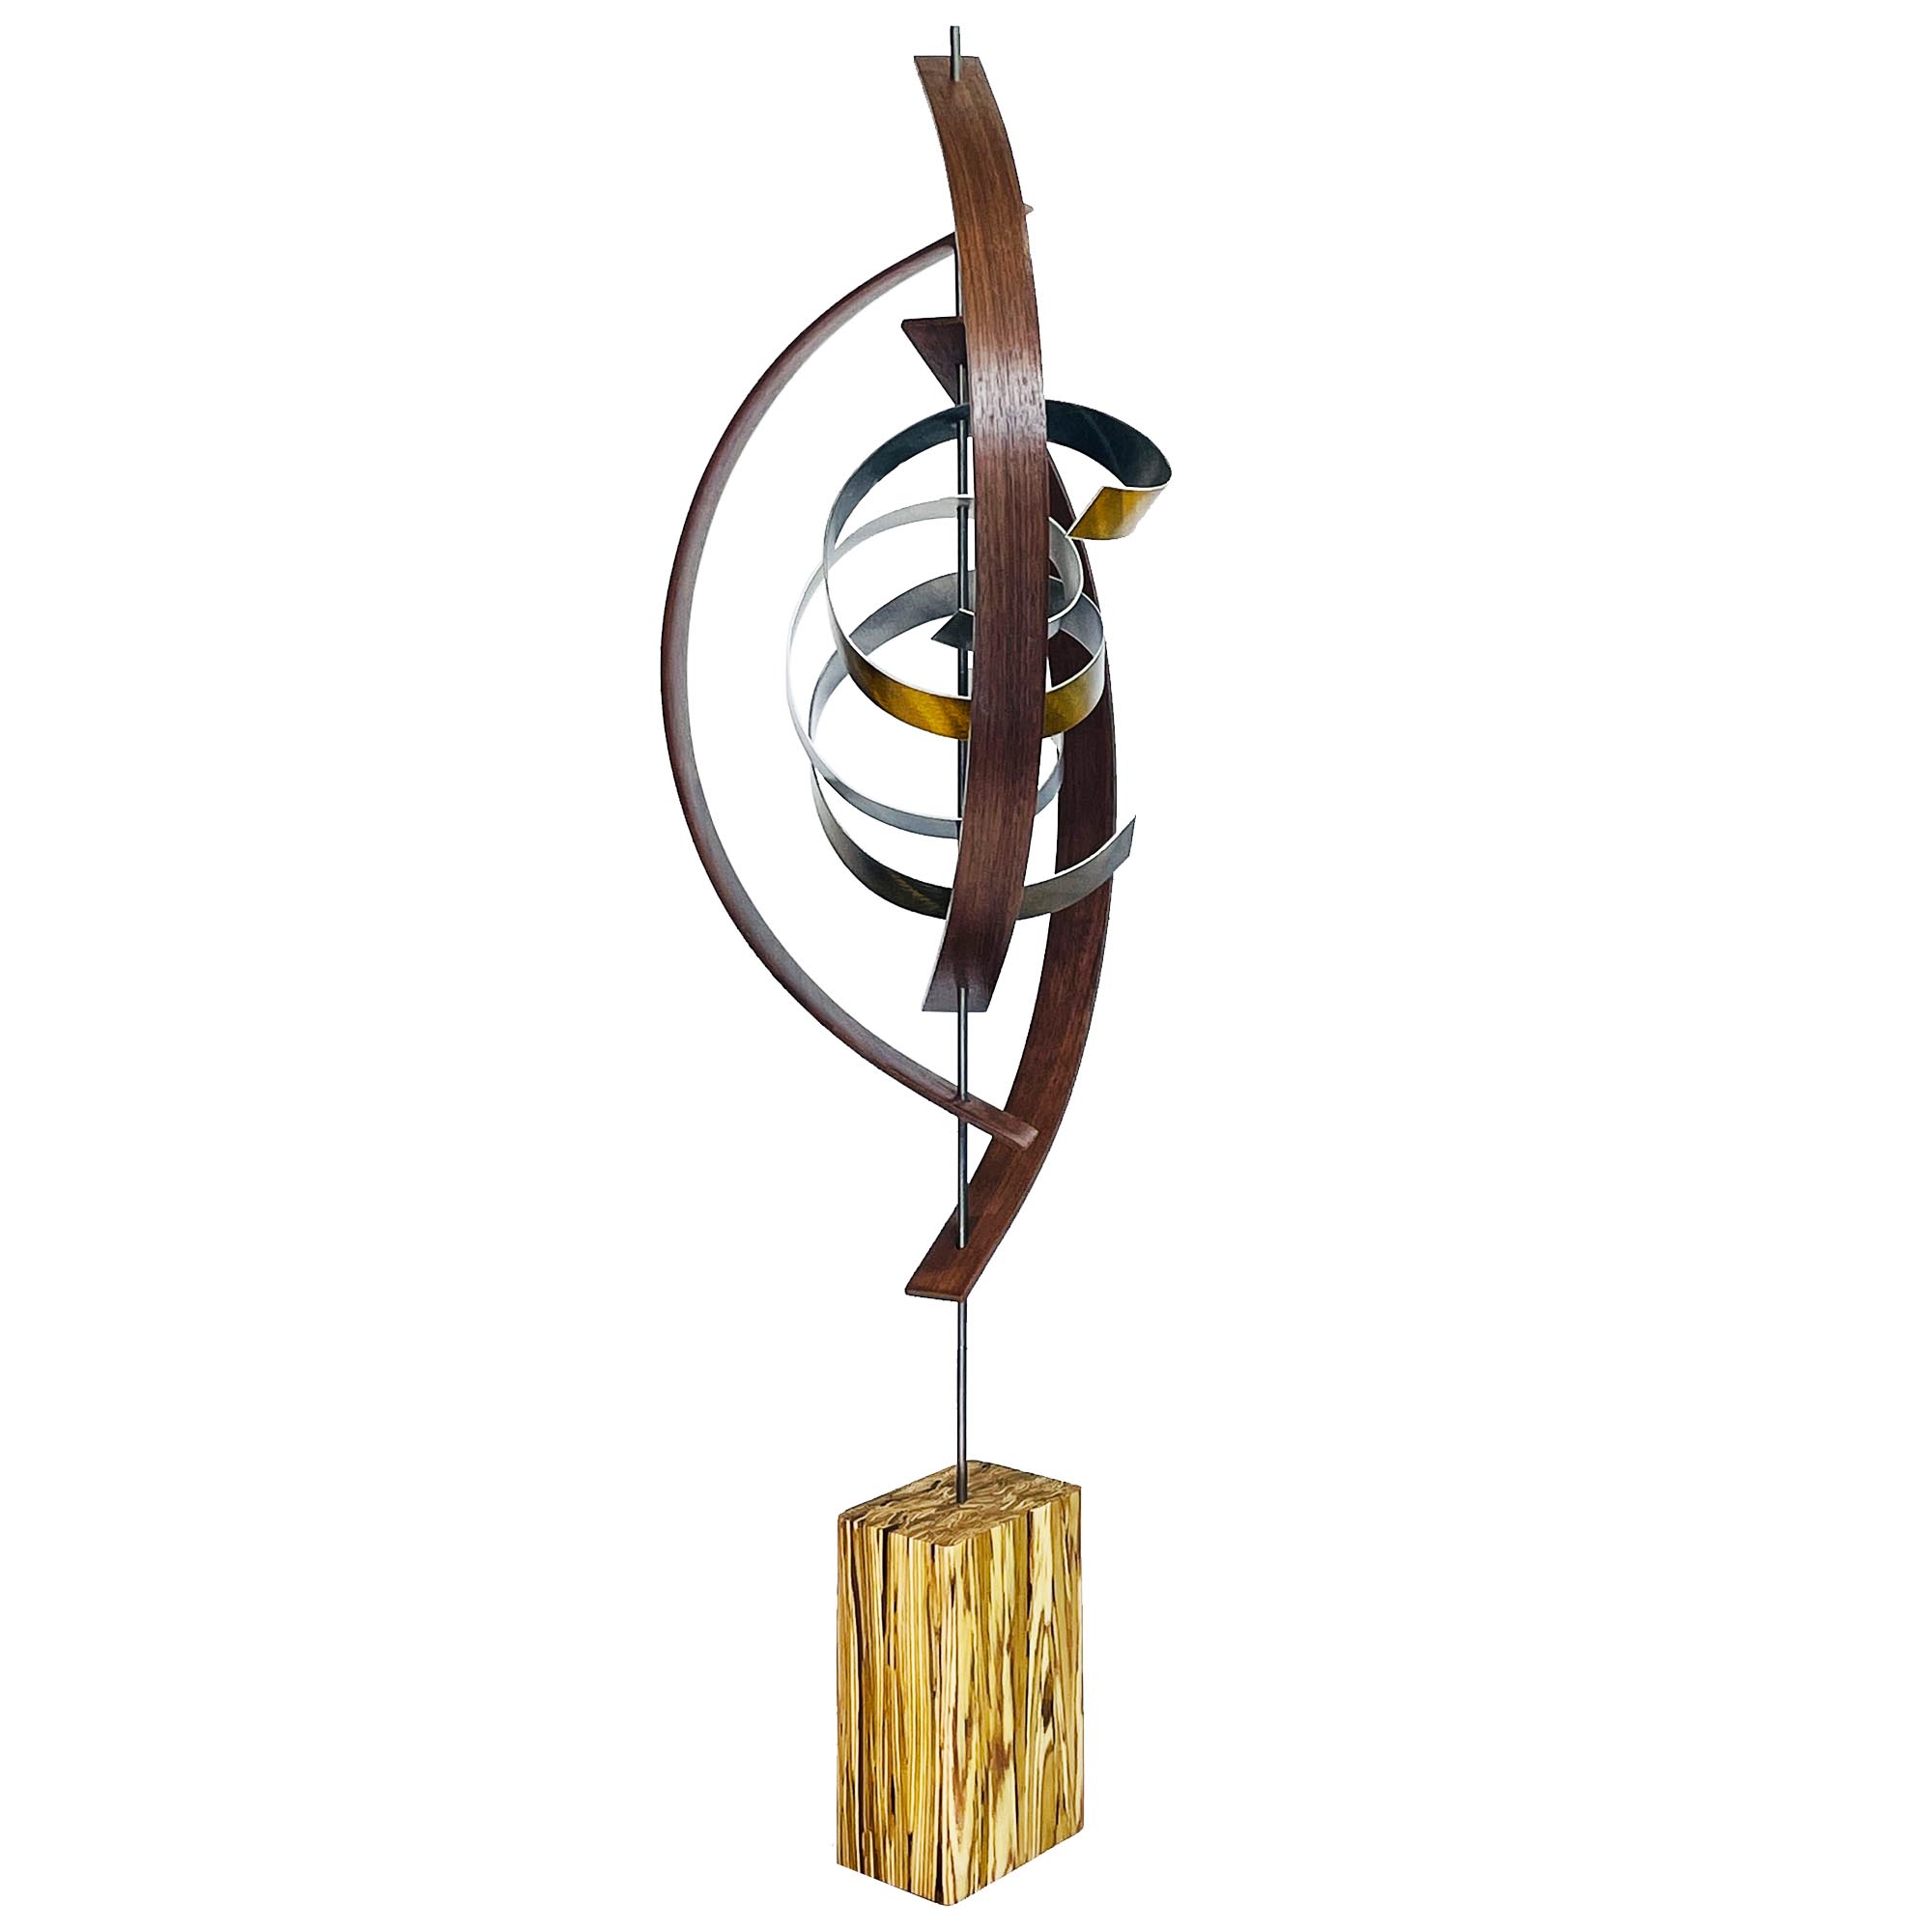 Spiral v2 by Jackson Wright - Abstract Wood Sculpture, Kinetic Sculpture - Image 3